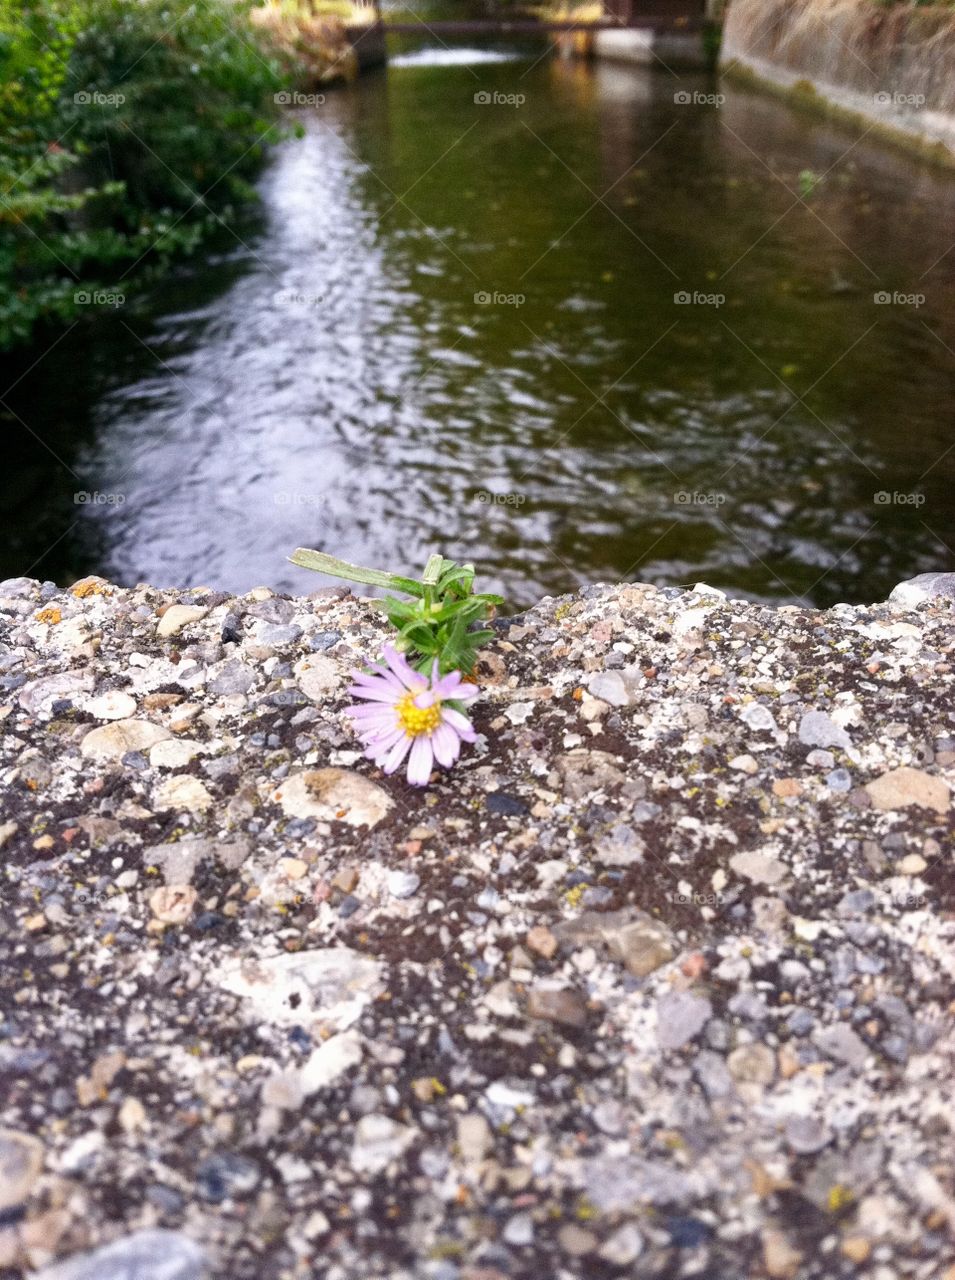 A small, purple flower on a strong, stone bridge shows both contrast and harmony. The full, Summer river behind it completes the scene.